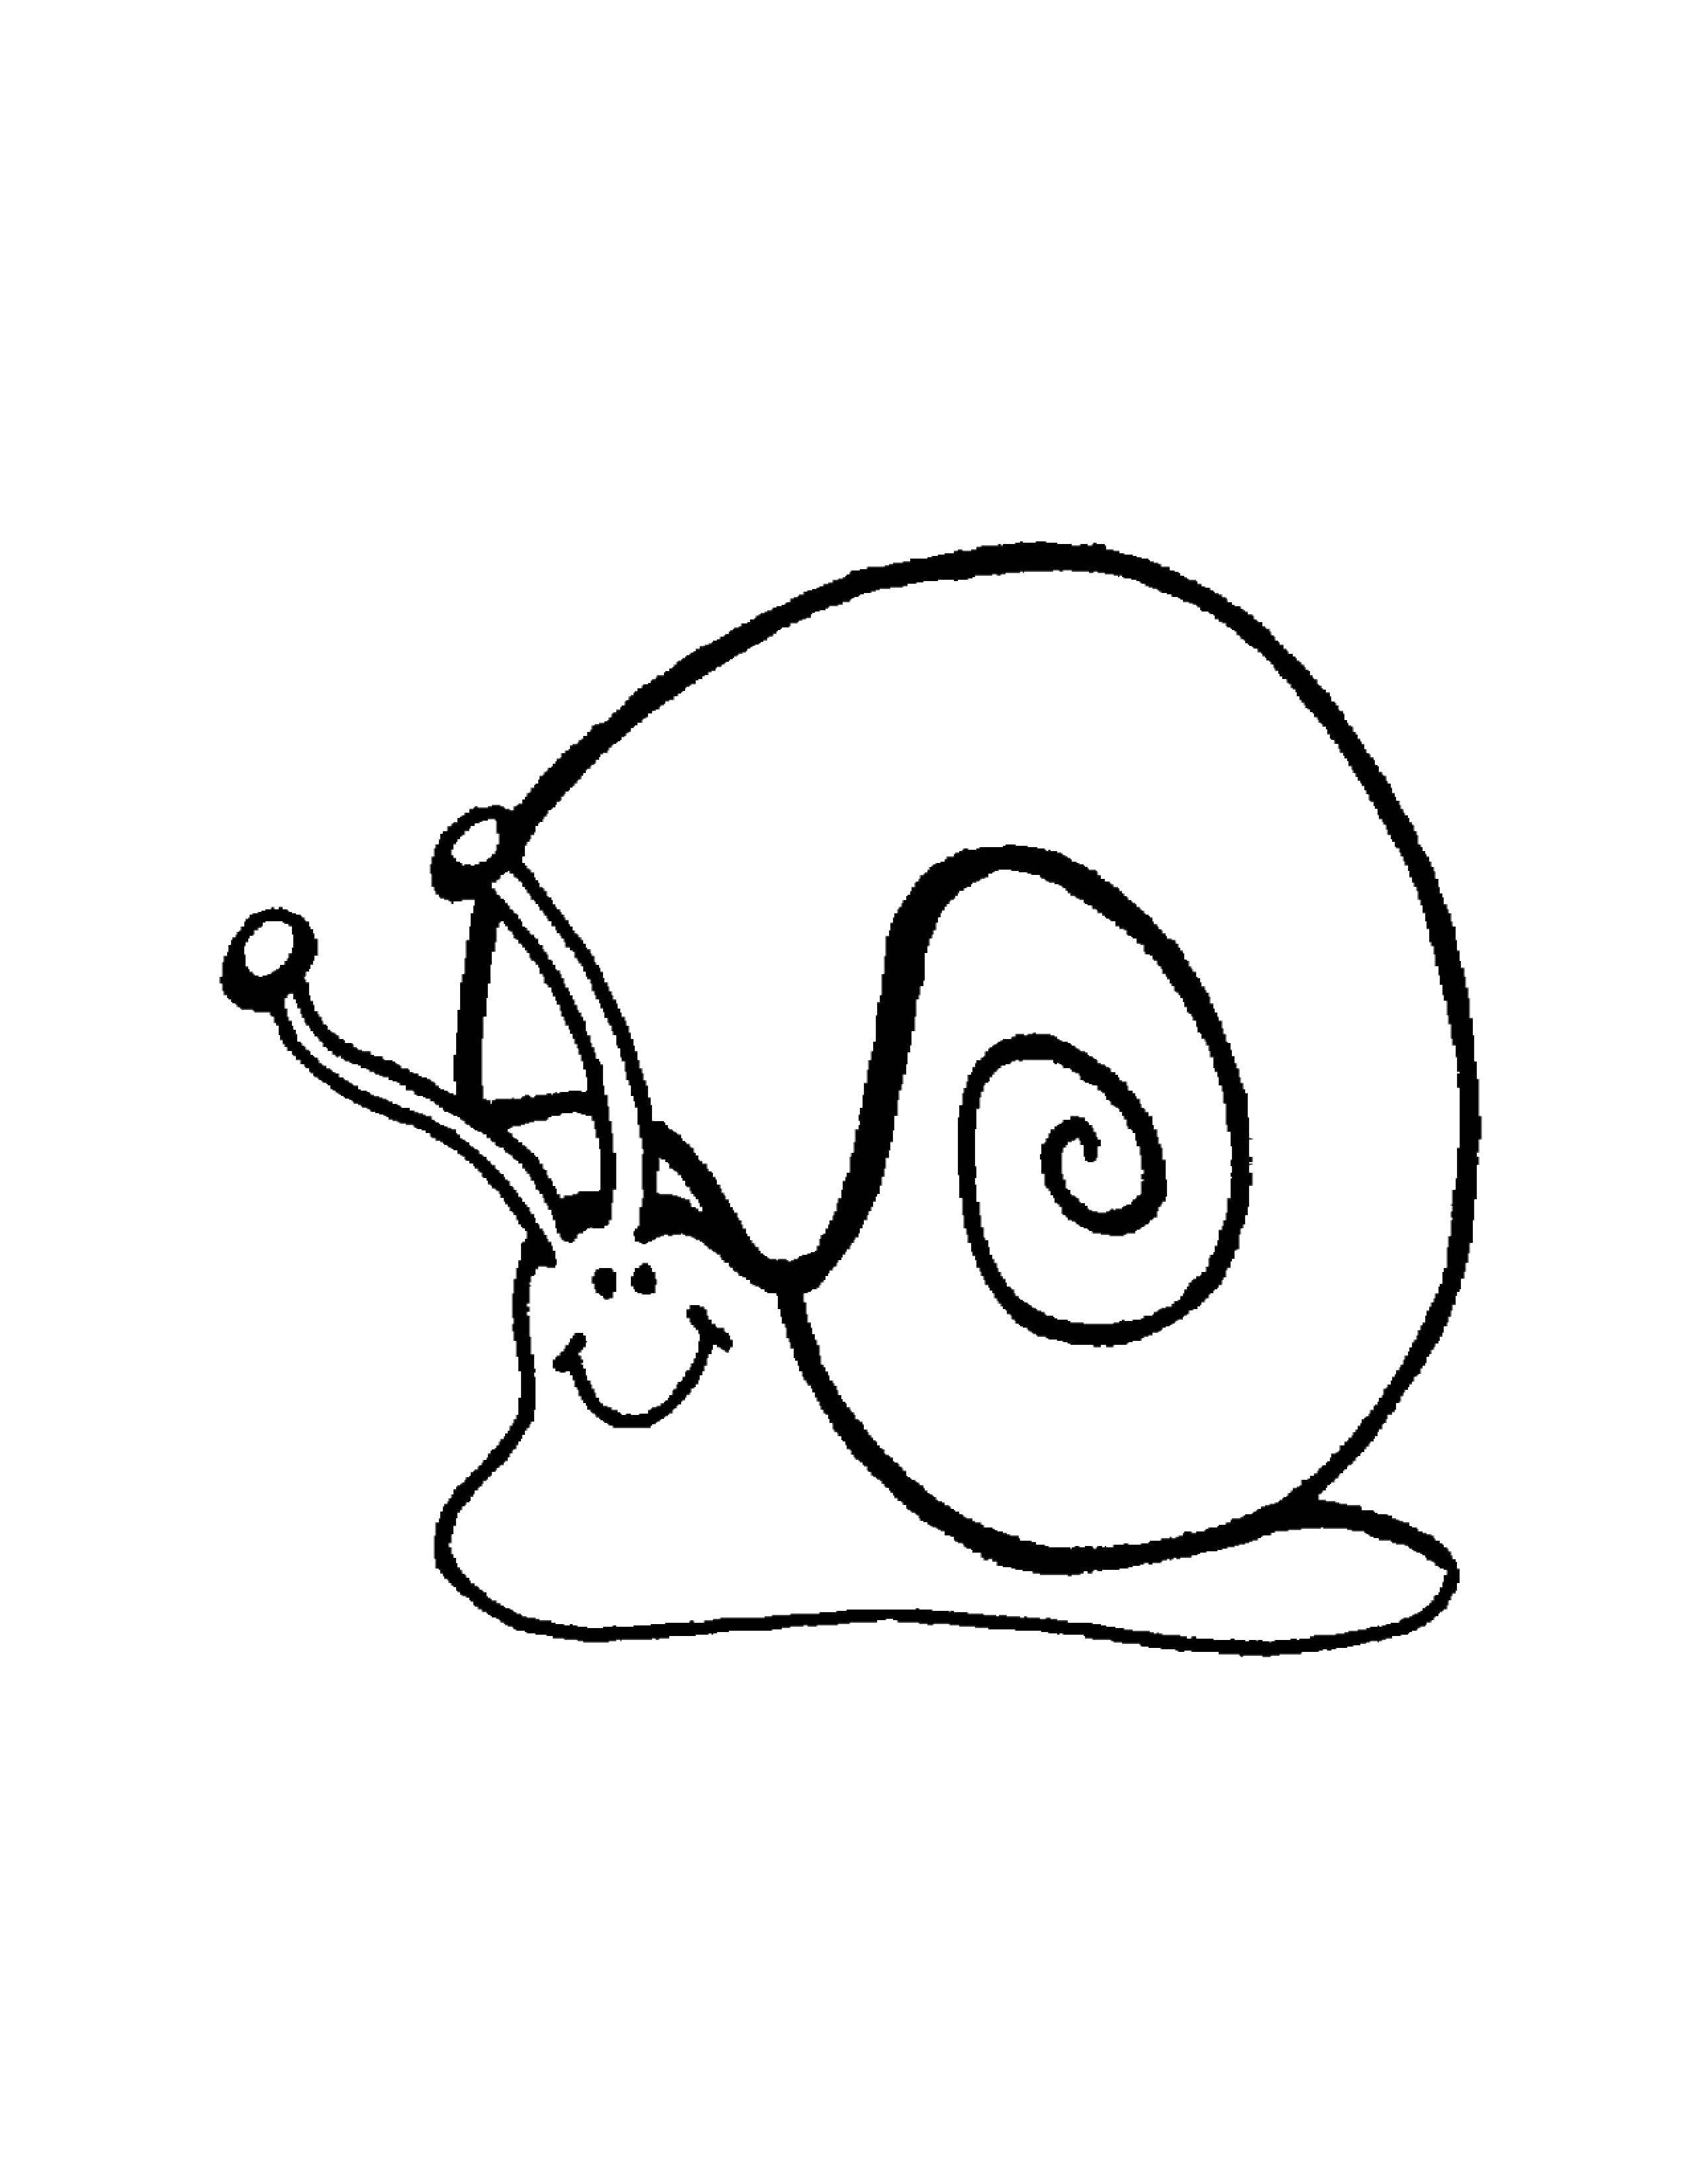 Coloring Big snail shell. Category Snails. Tags:  Snail.